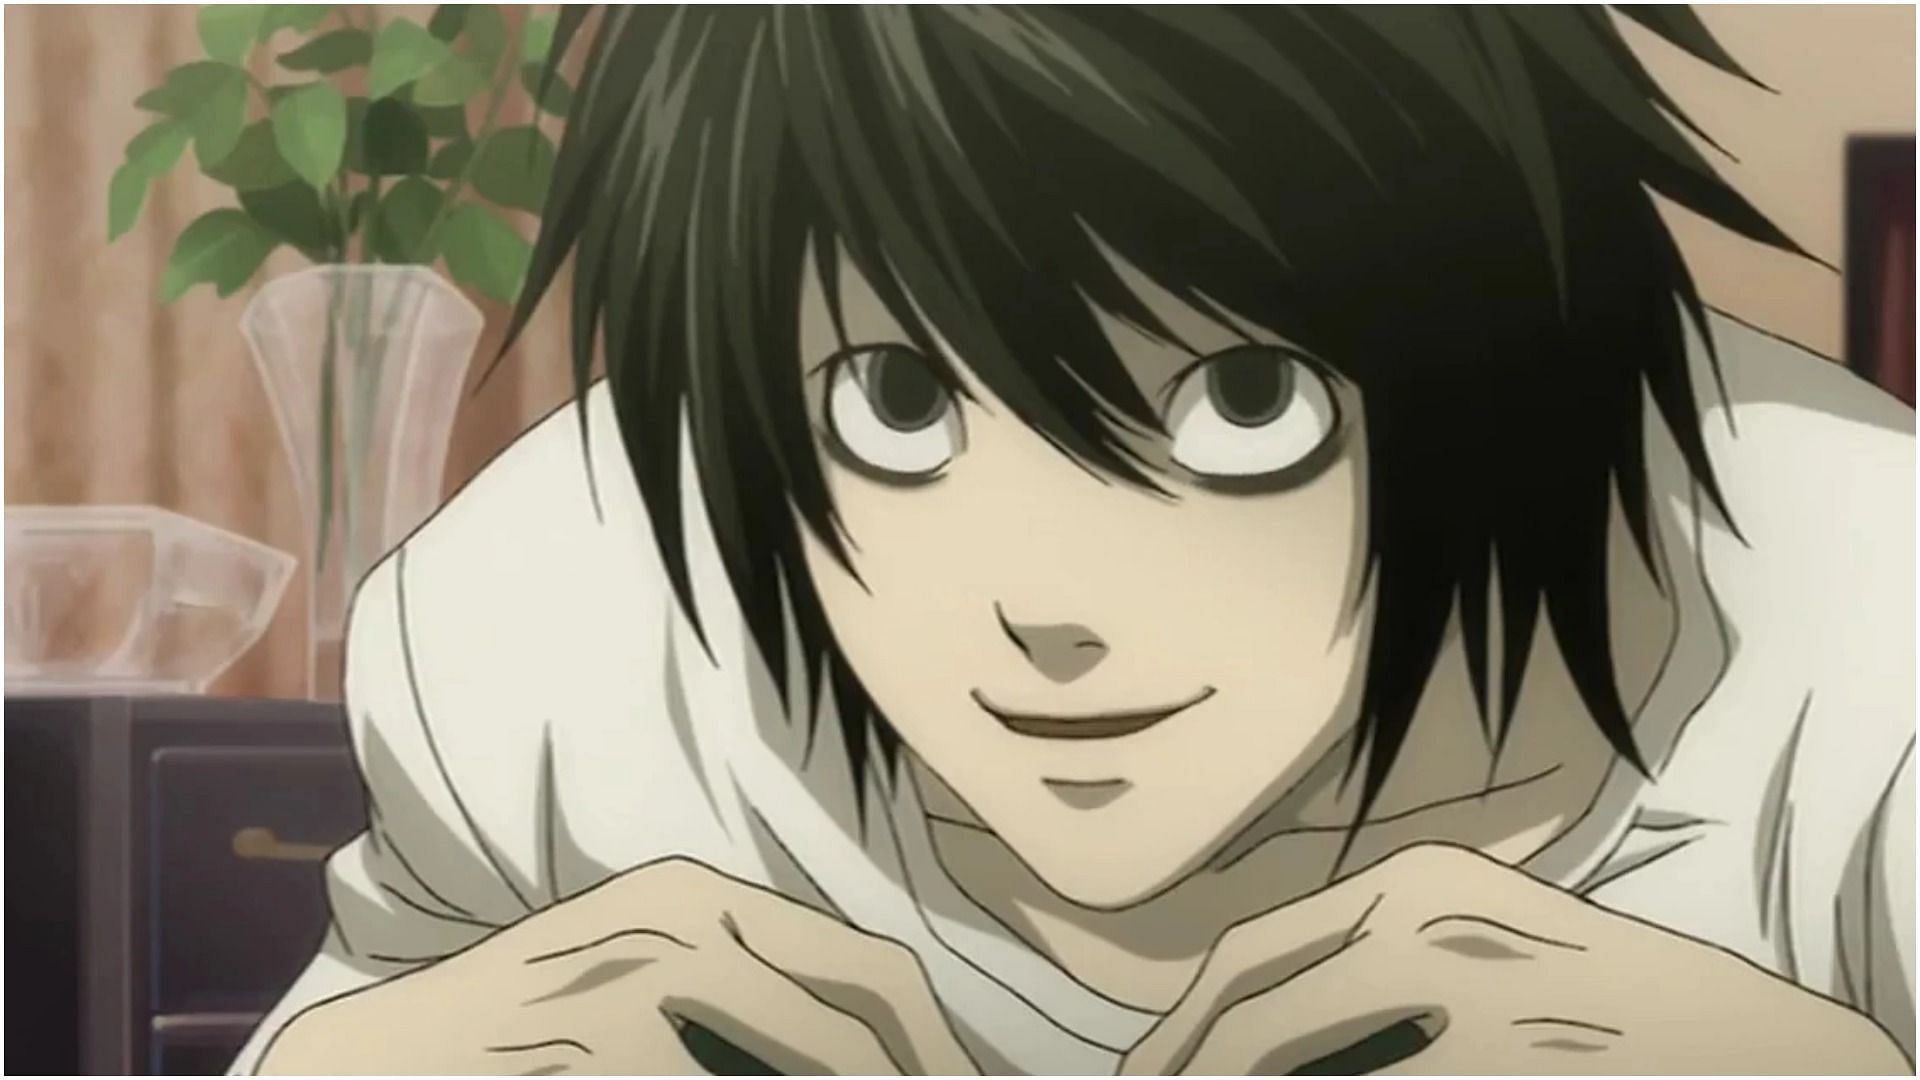 L as seen in Death Note (Image via Madhouse)